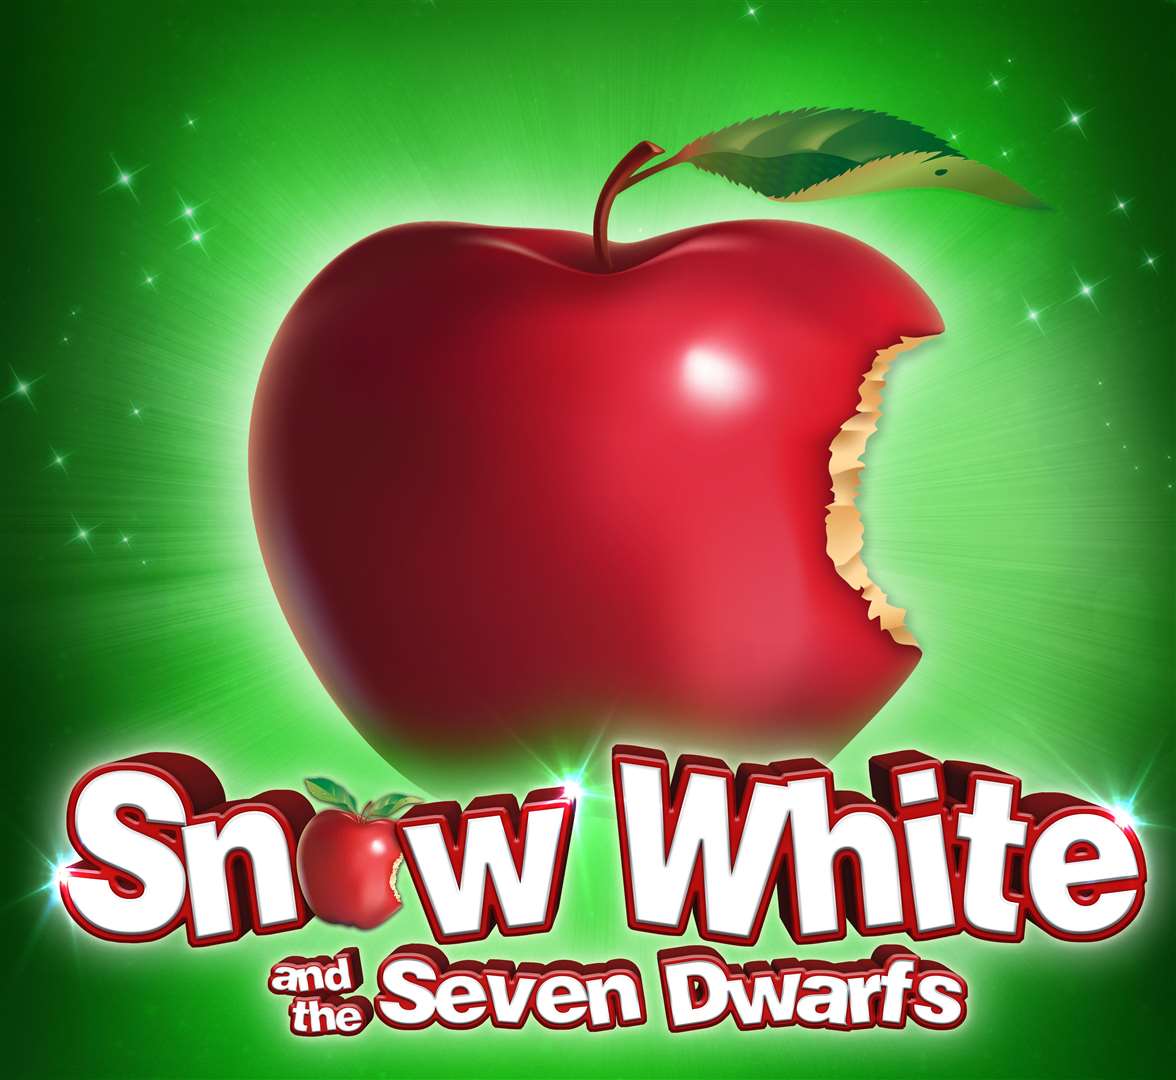 Snow White and the Seven Dwarfs will be at the Assembly Hall Theatre in Tunbridge Wells